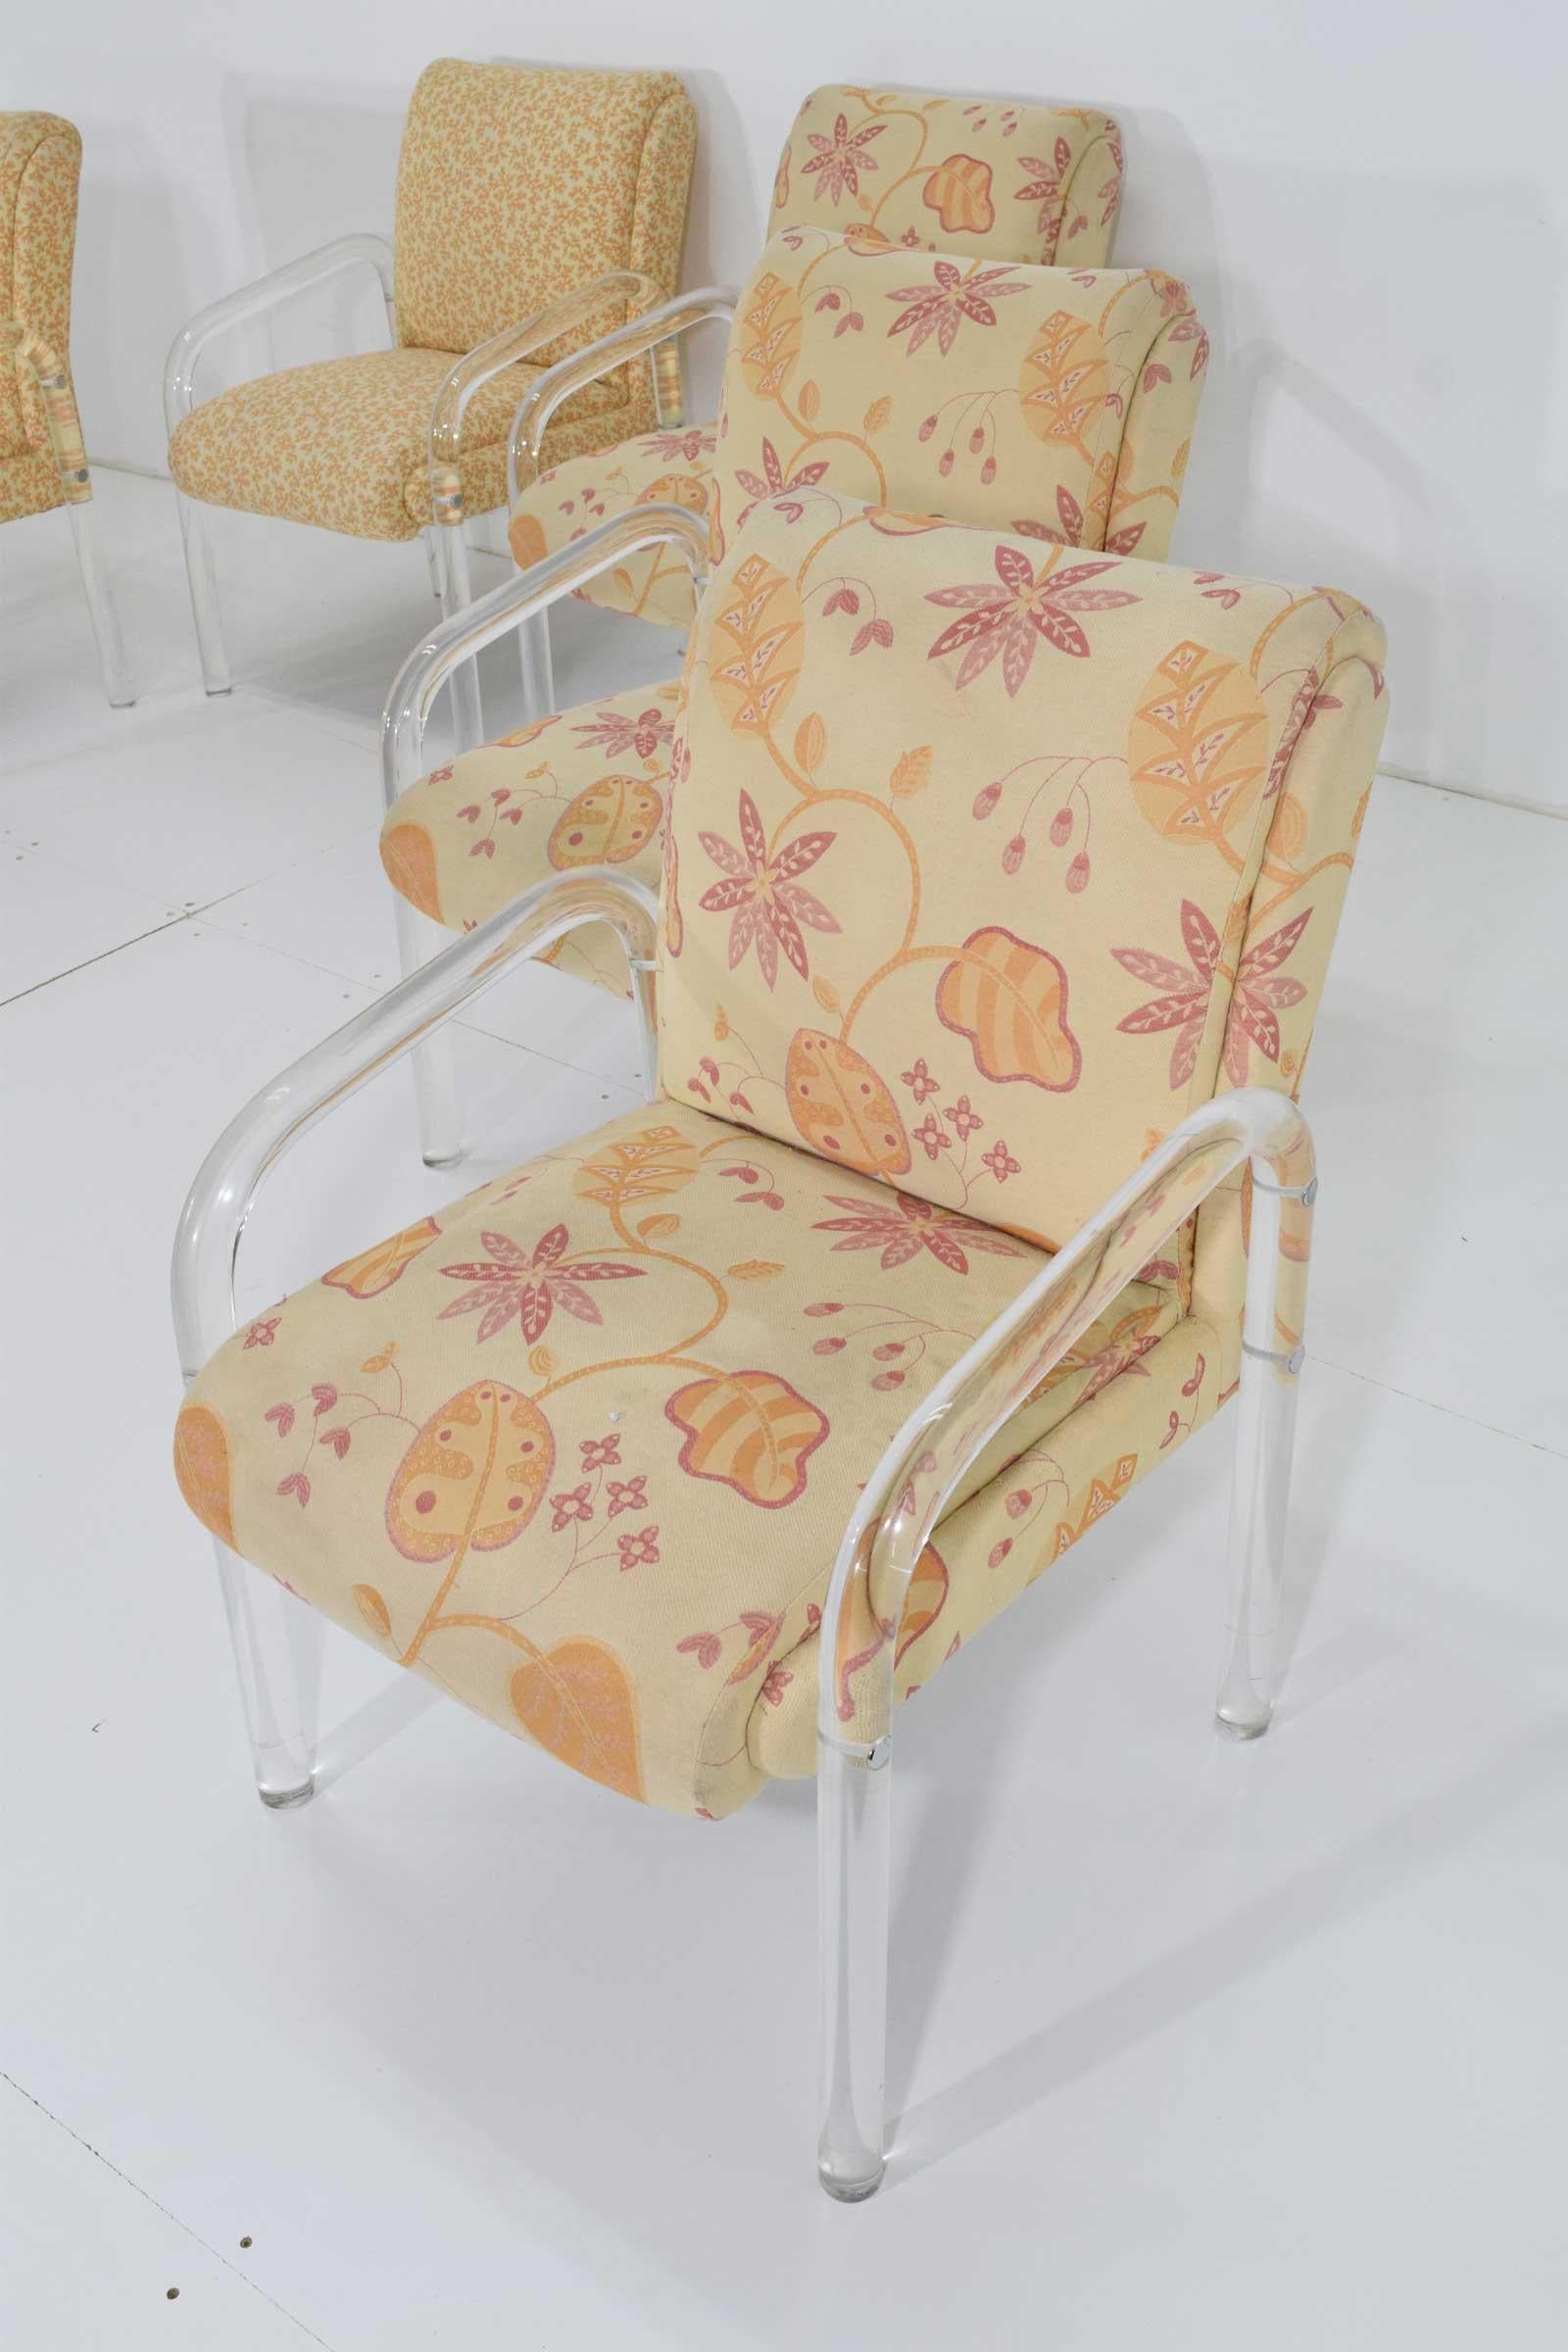 A beautiful set of dining chairs. The upholstery is fine but we can easily redo in a fabric of your choice. The chairs are very comfortable, timelessly elegant and a design Classic.